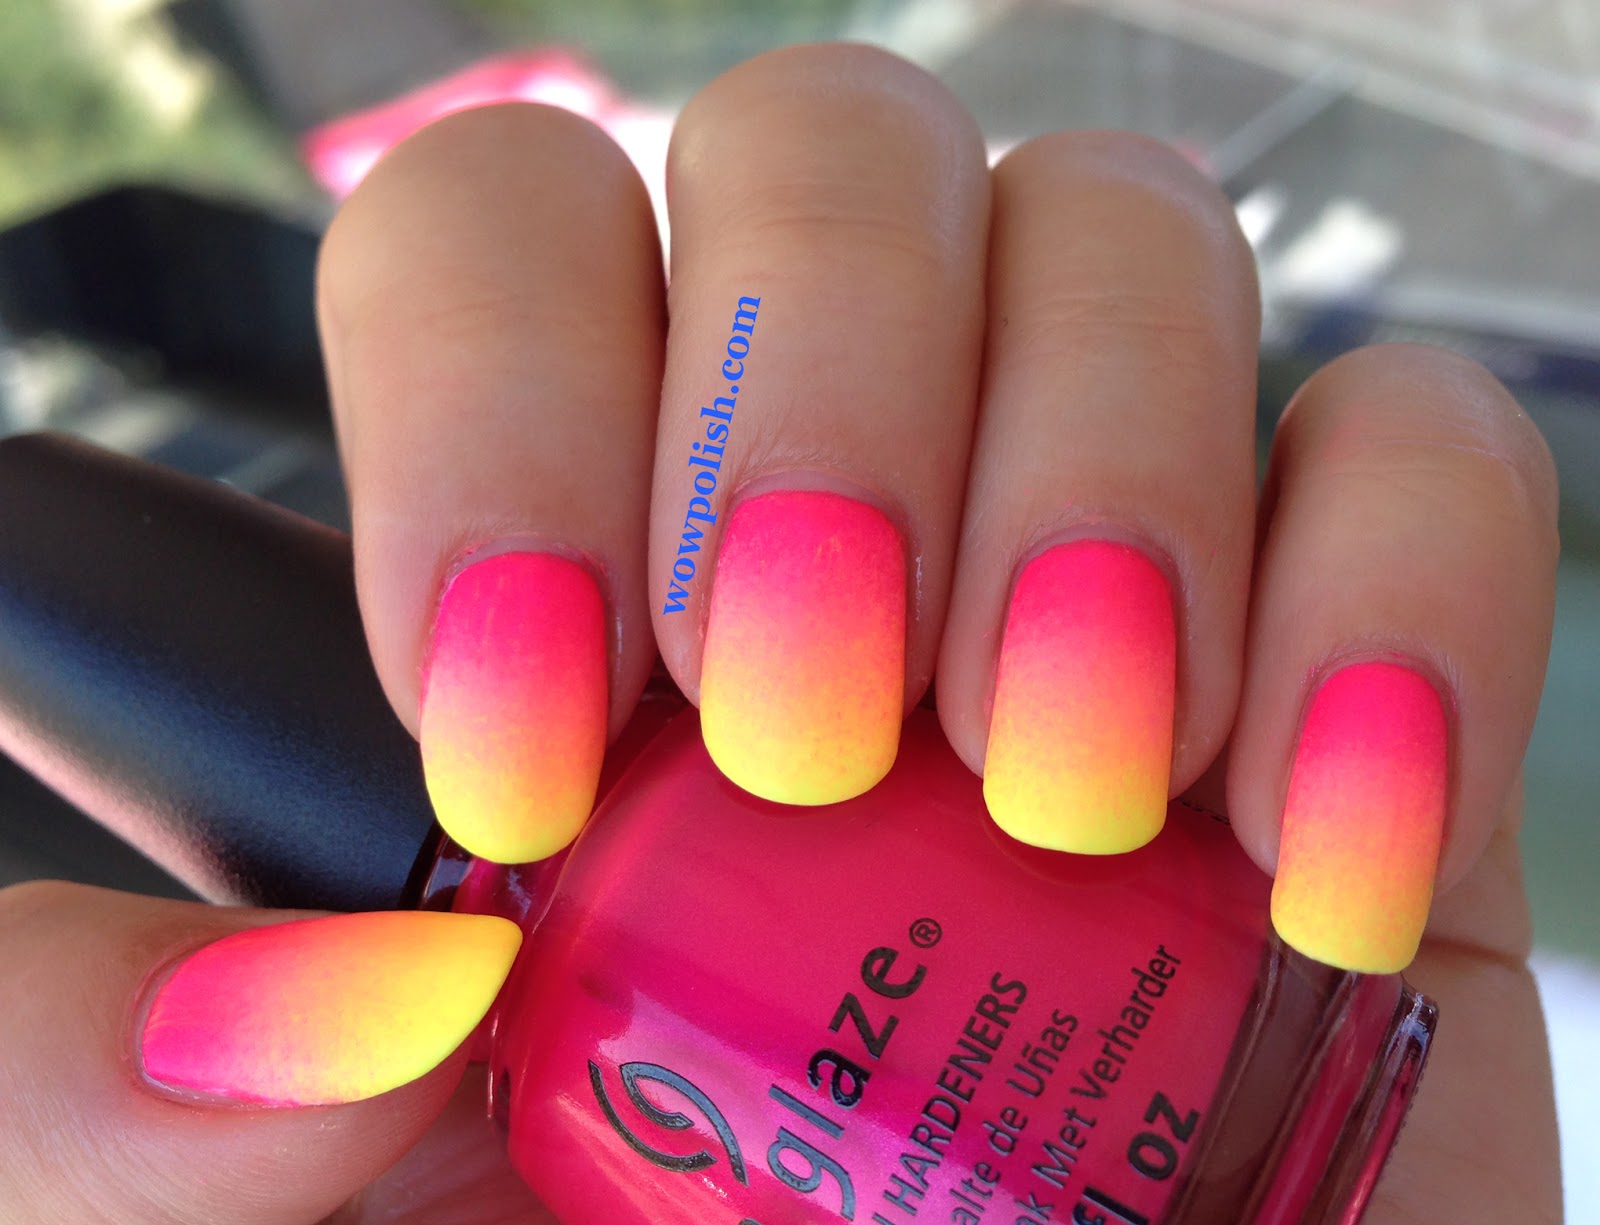 Neon Green Nail Designs for Summer on Pinterest - wide 11